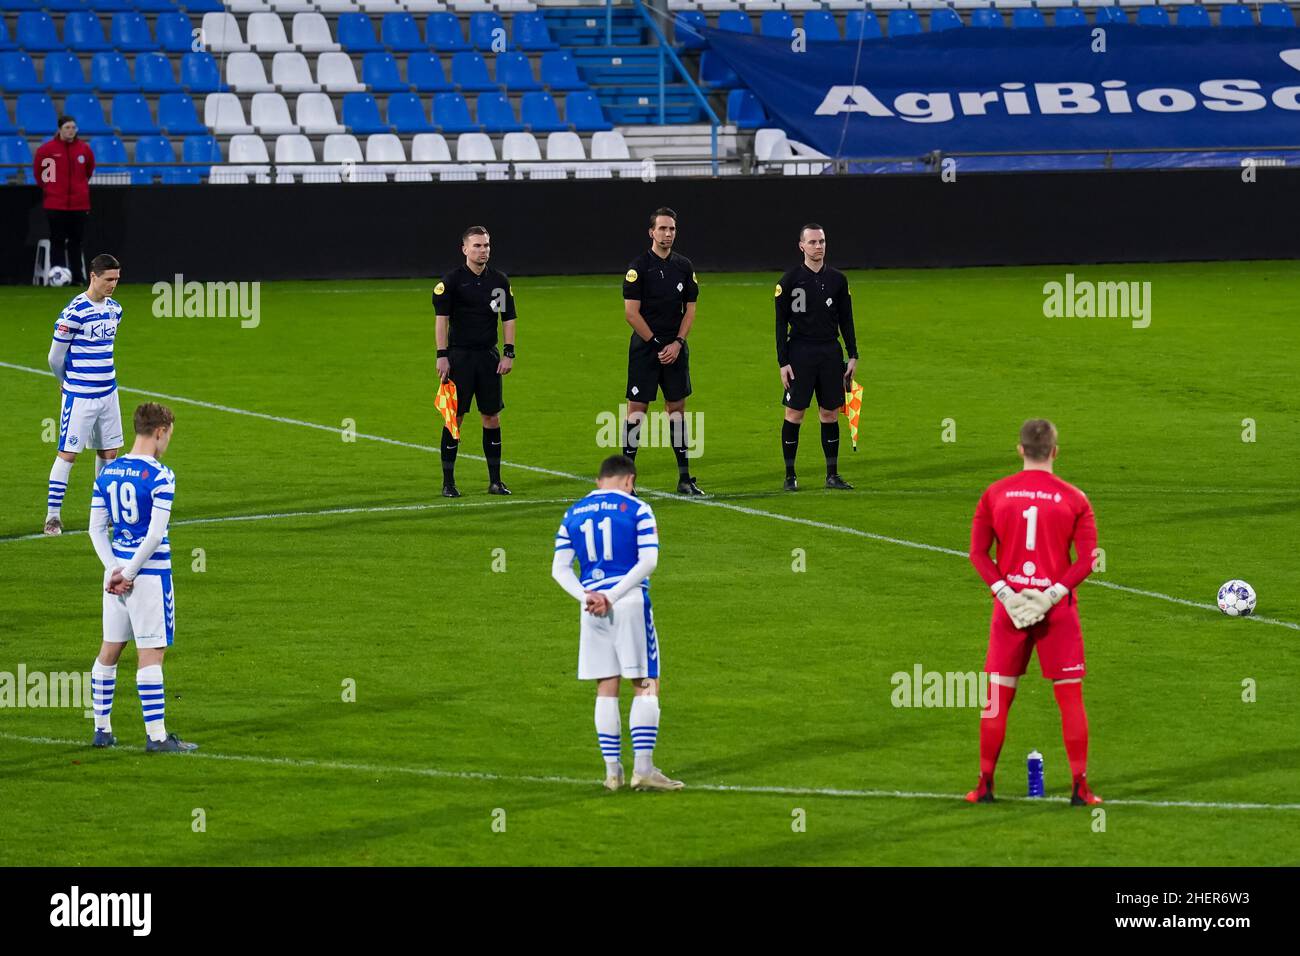 DOETINCHEM, NETHERLANDS - JANUARY 9: Assistant referee Jordi Been, Referee Clay Ruperti, Assistant referee Yorick Weterings and the teams of De Graafschap and VVV-Venlo observe a minute of silence ahead of kick-off in memory of all the so called Superboeren who passed away in 2021 during the Dutch Keukenkampioendivisie match between De Graafschap and VVV-Venlo at De Vijverberg on January 9, 2022 in Doetinchem, Netherlands (Photo by Rene Nijhuis/Orange Pictures) Stock Photo